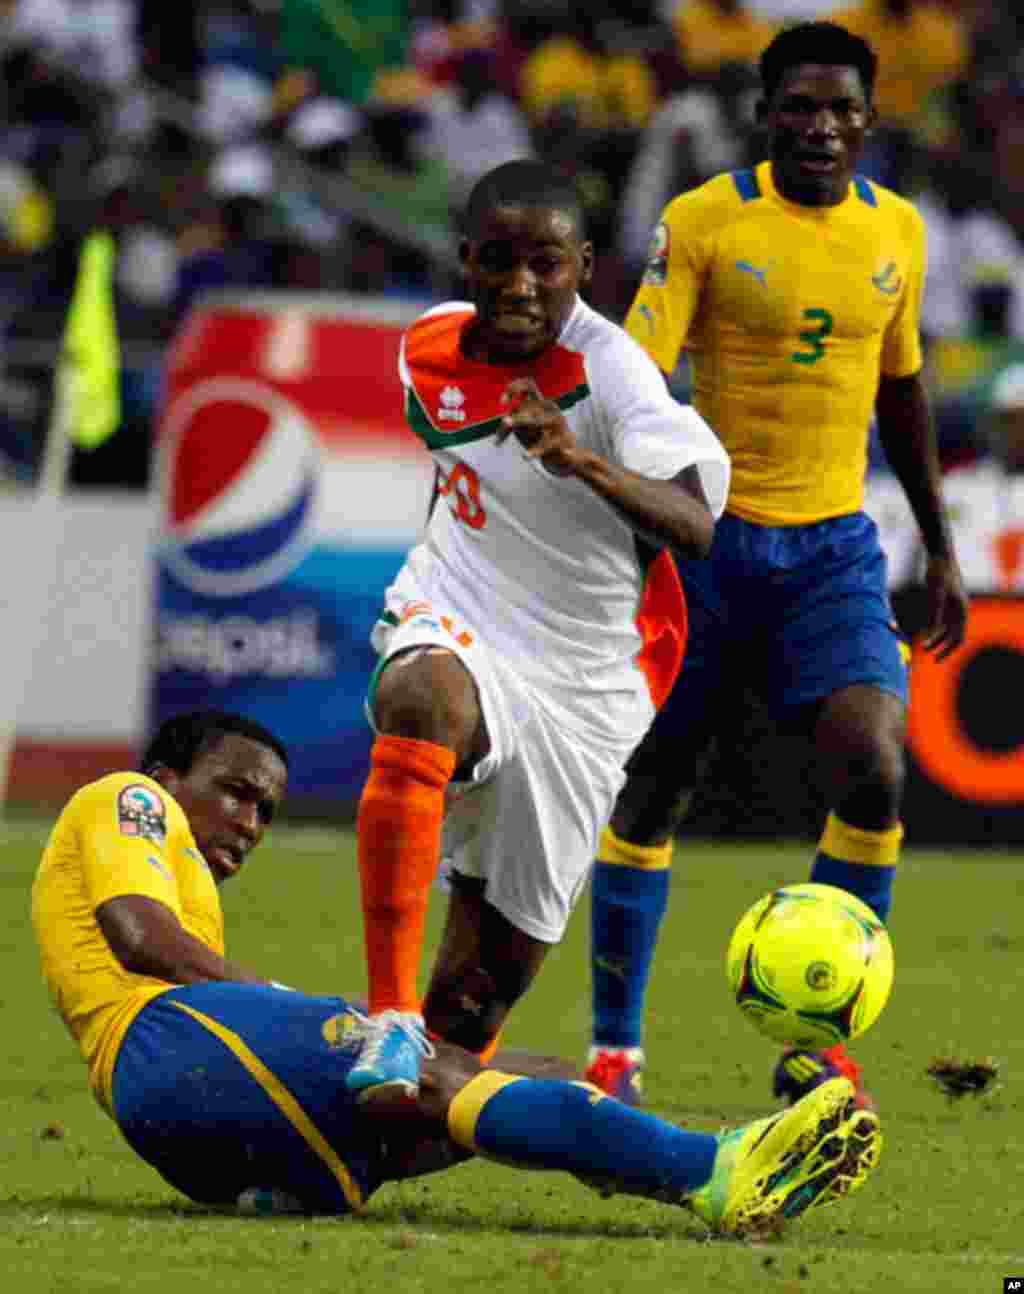 Niger'a Mountari is tackled by Gabon's Ondo during their African Cup of Nations soccer match in Libreville